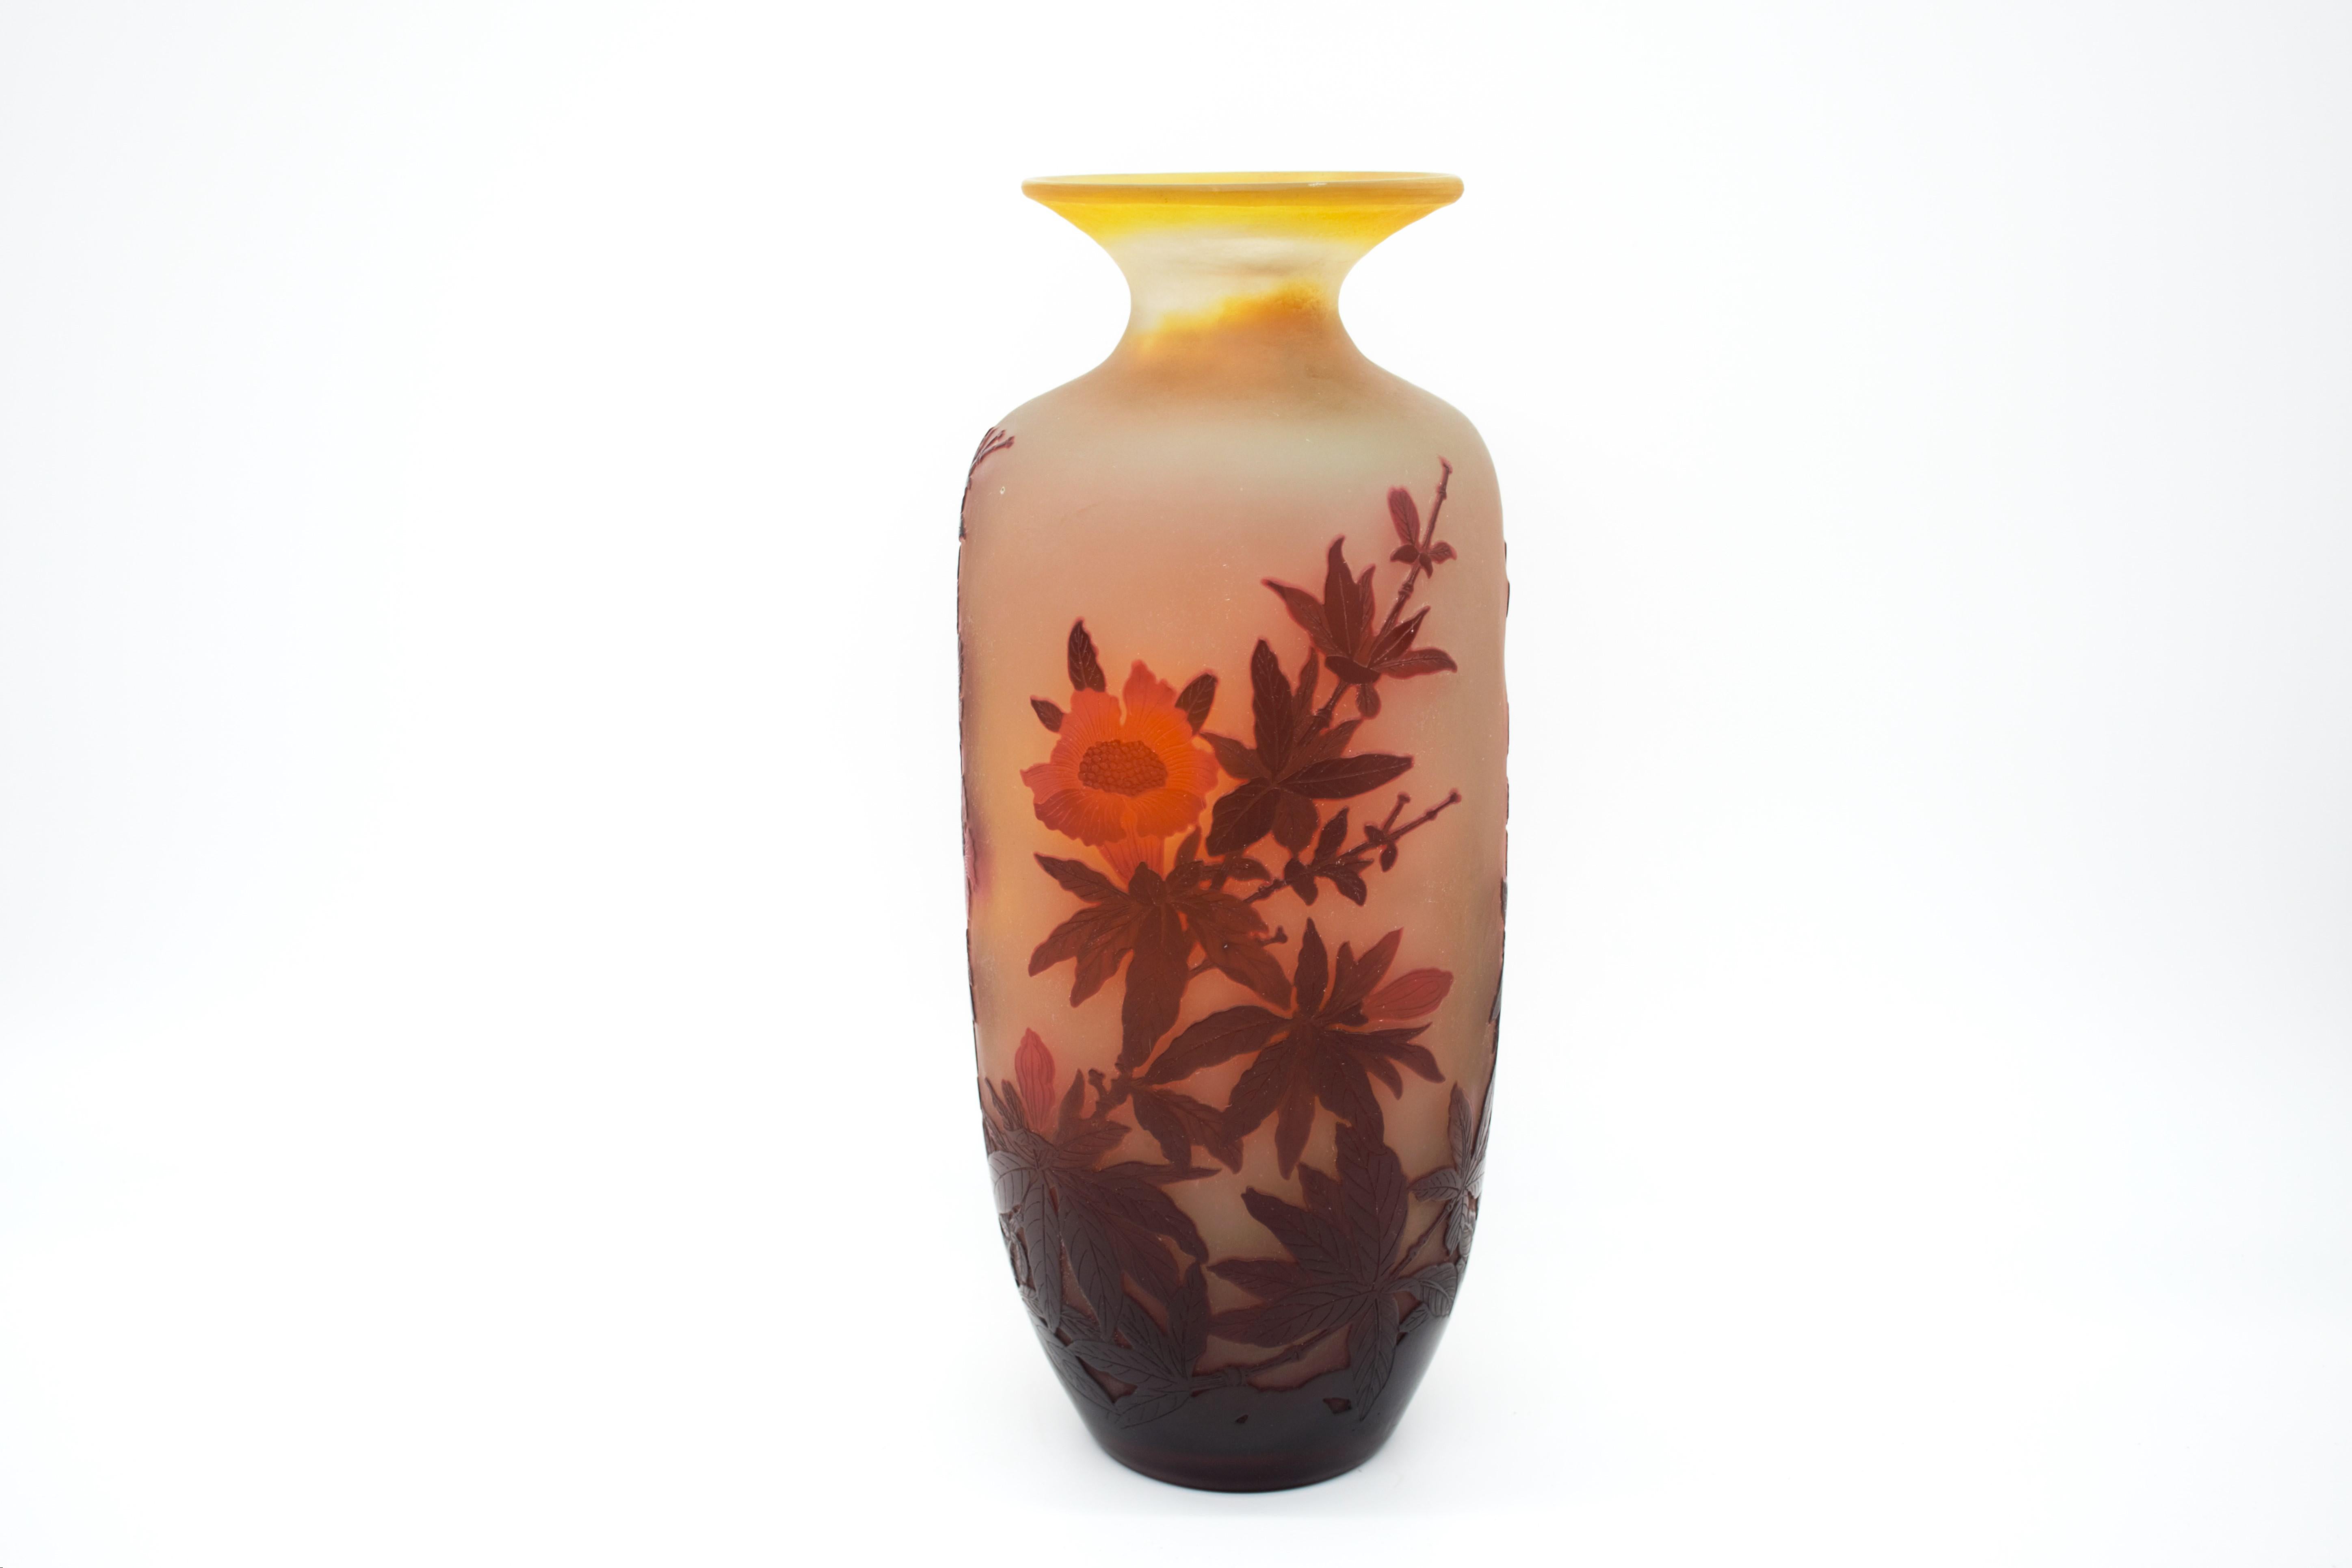 An attractive late 19th Century cameo glass vase of elongated square form cut with decorative burgundy and red flowers against a warm yellow background with excellent hand finished detail and colour, signed Galle in cameo, this vase is rare because